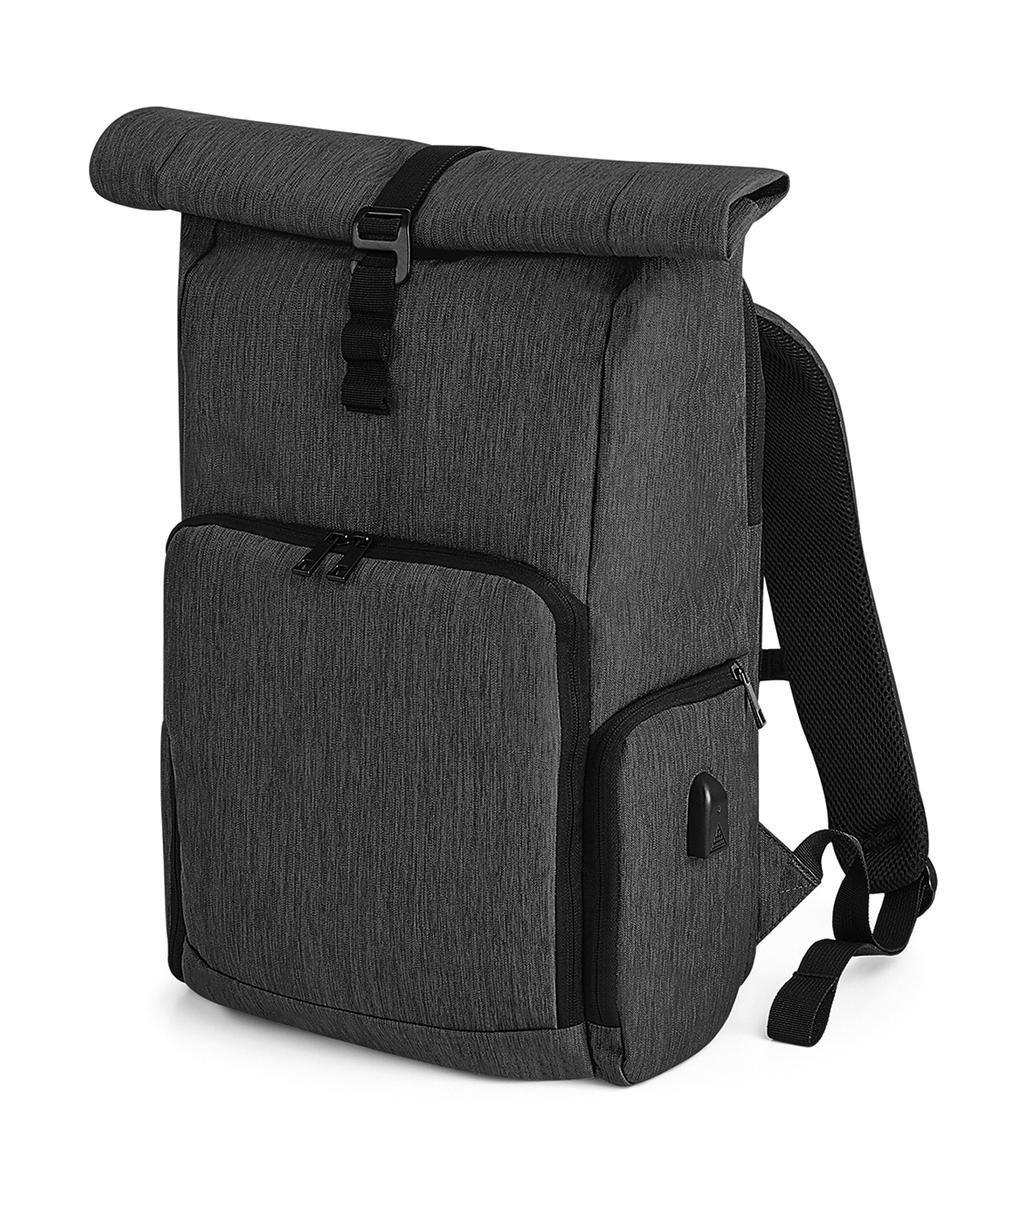  Q-Tech Charge Roll-Top Backpack in Farbe Granite Marl